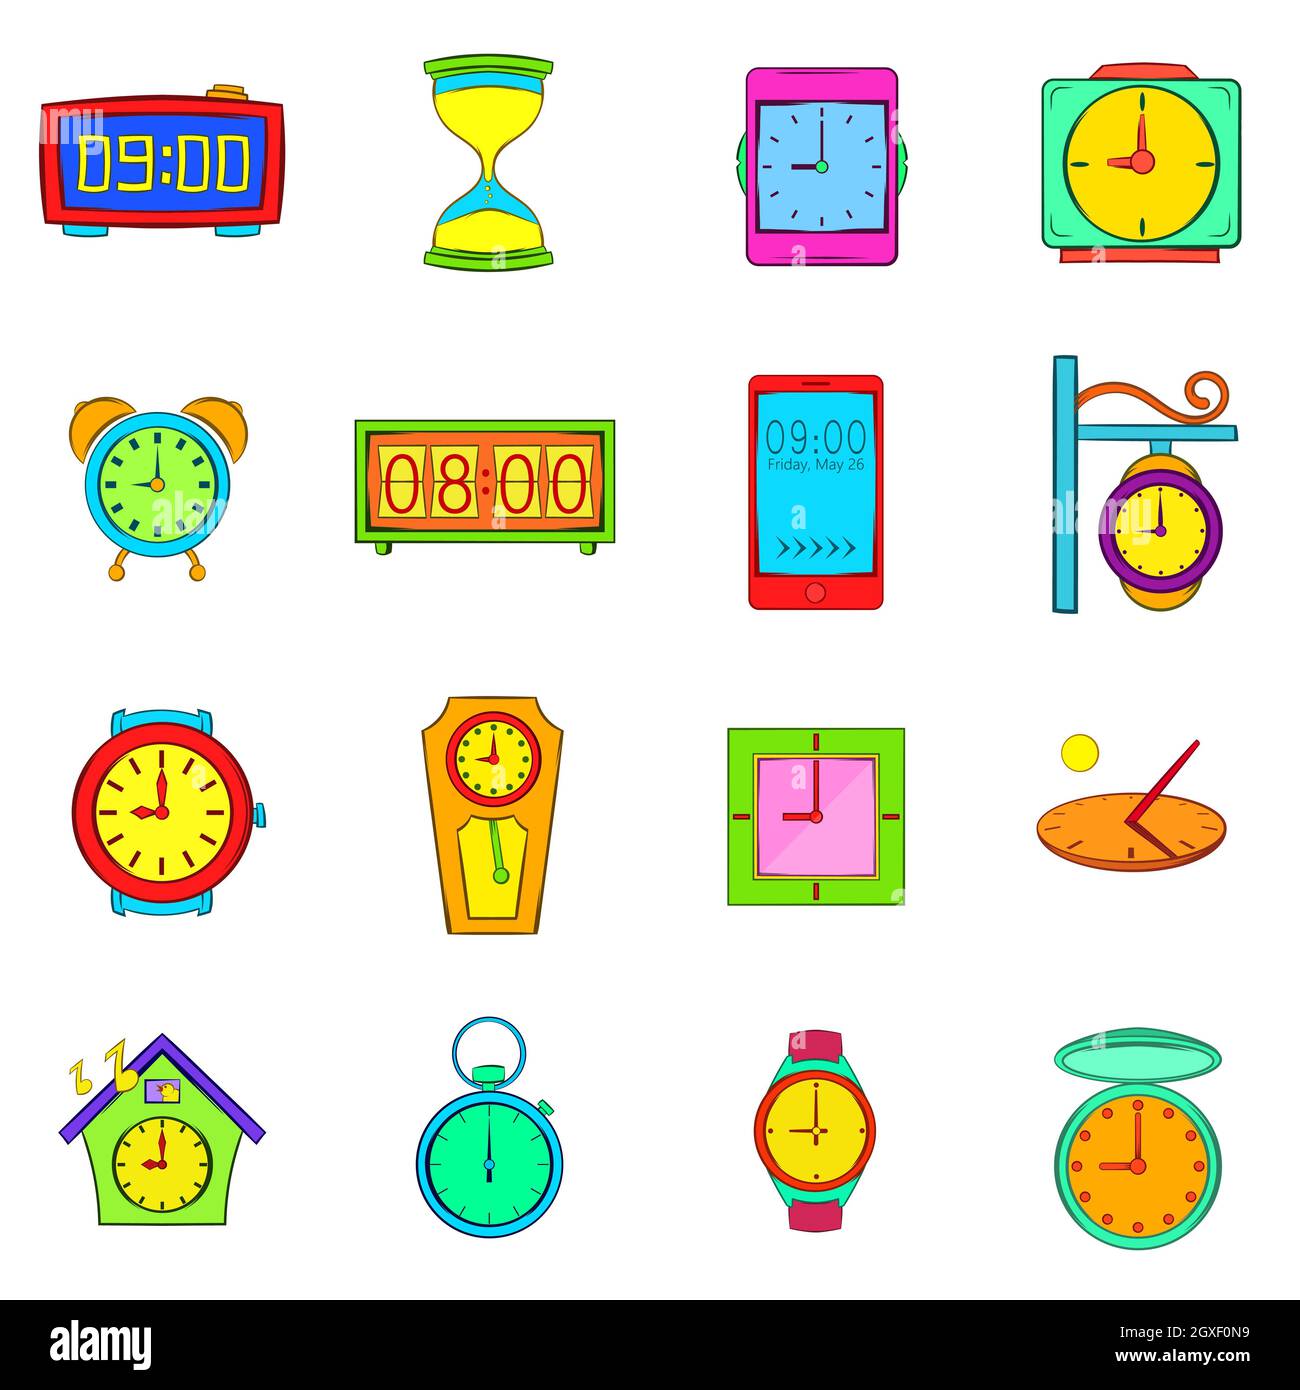 Time and Clock icons set in pop-art style isolated on white background Stock Photo